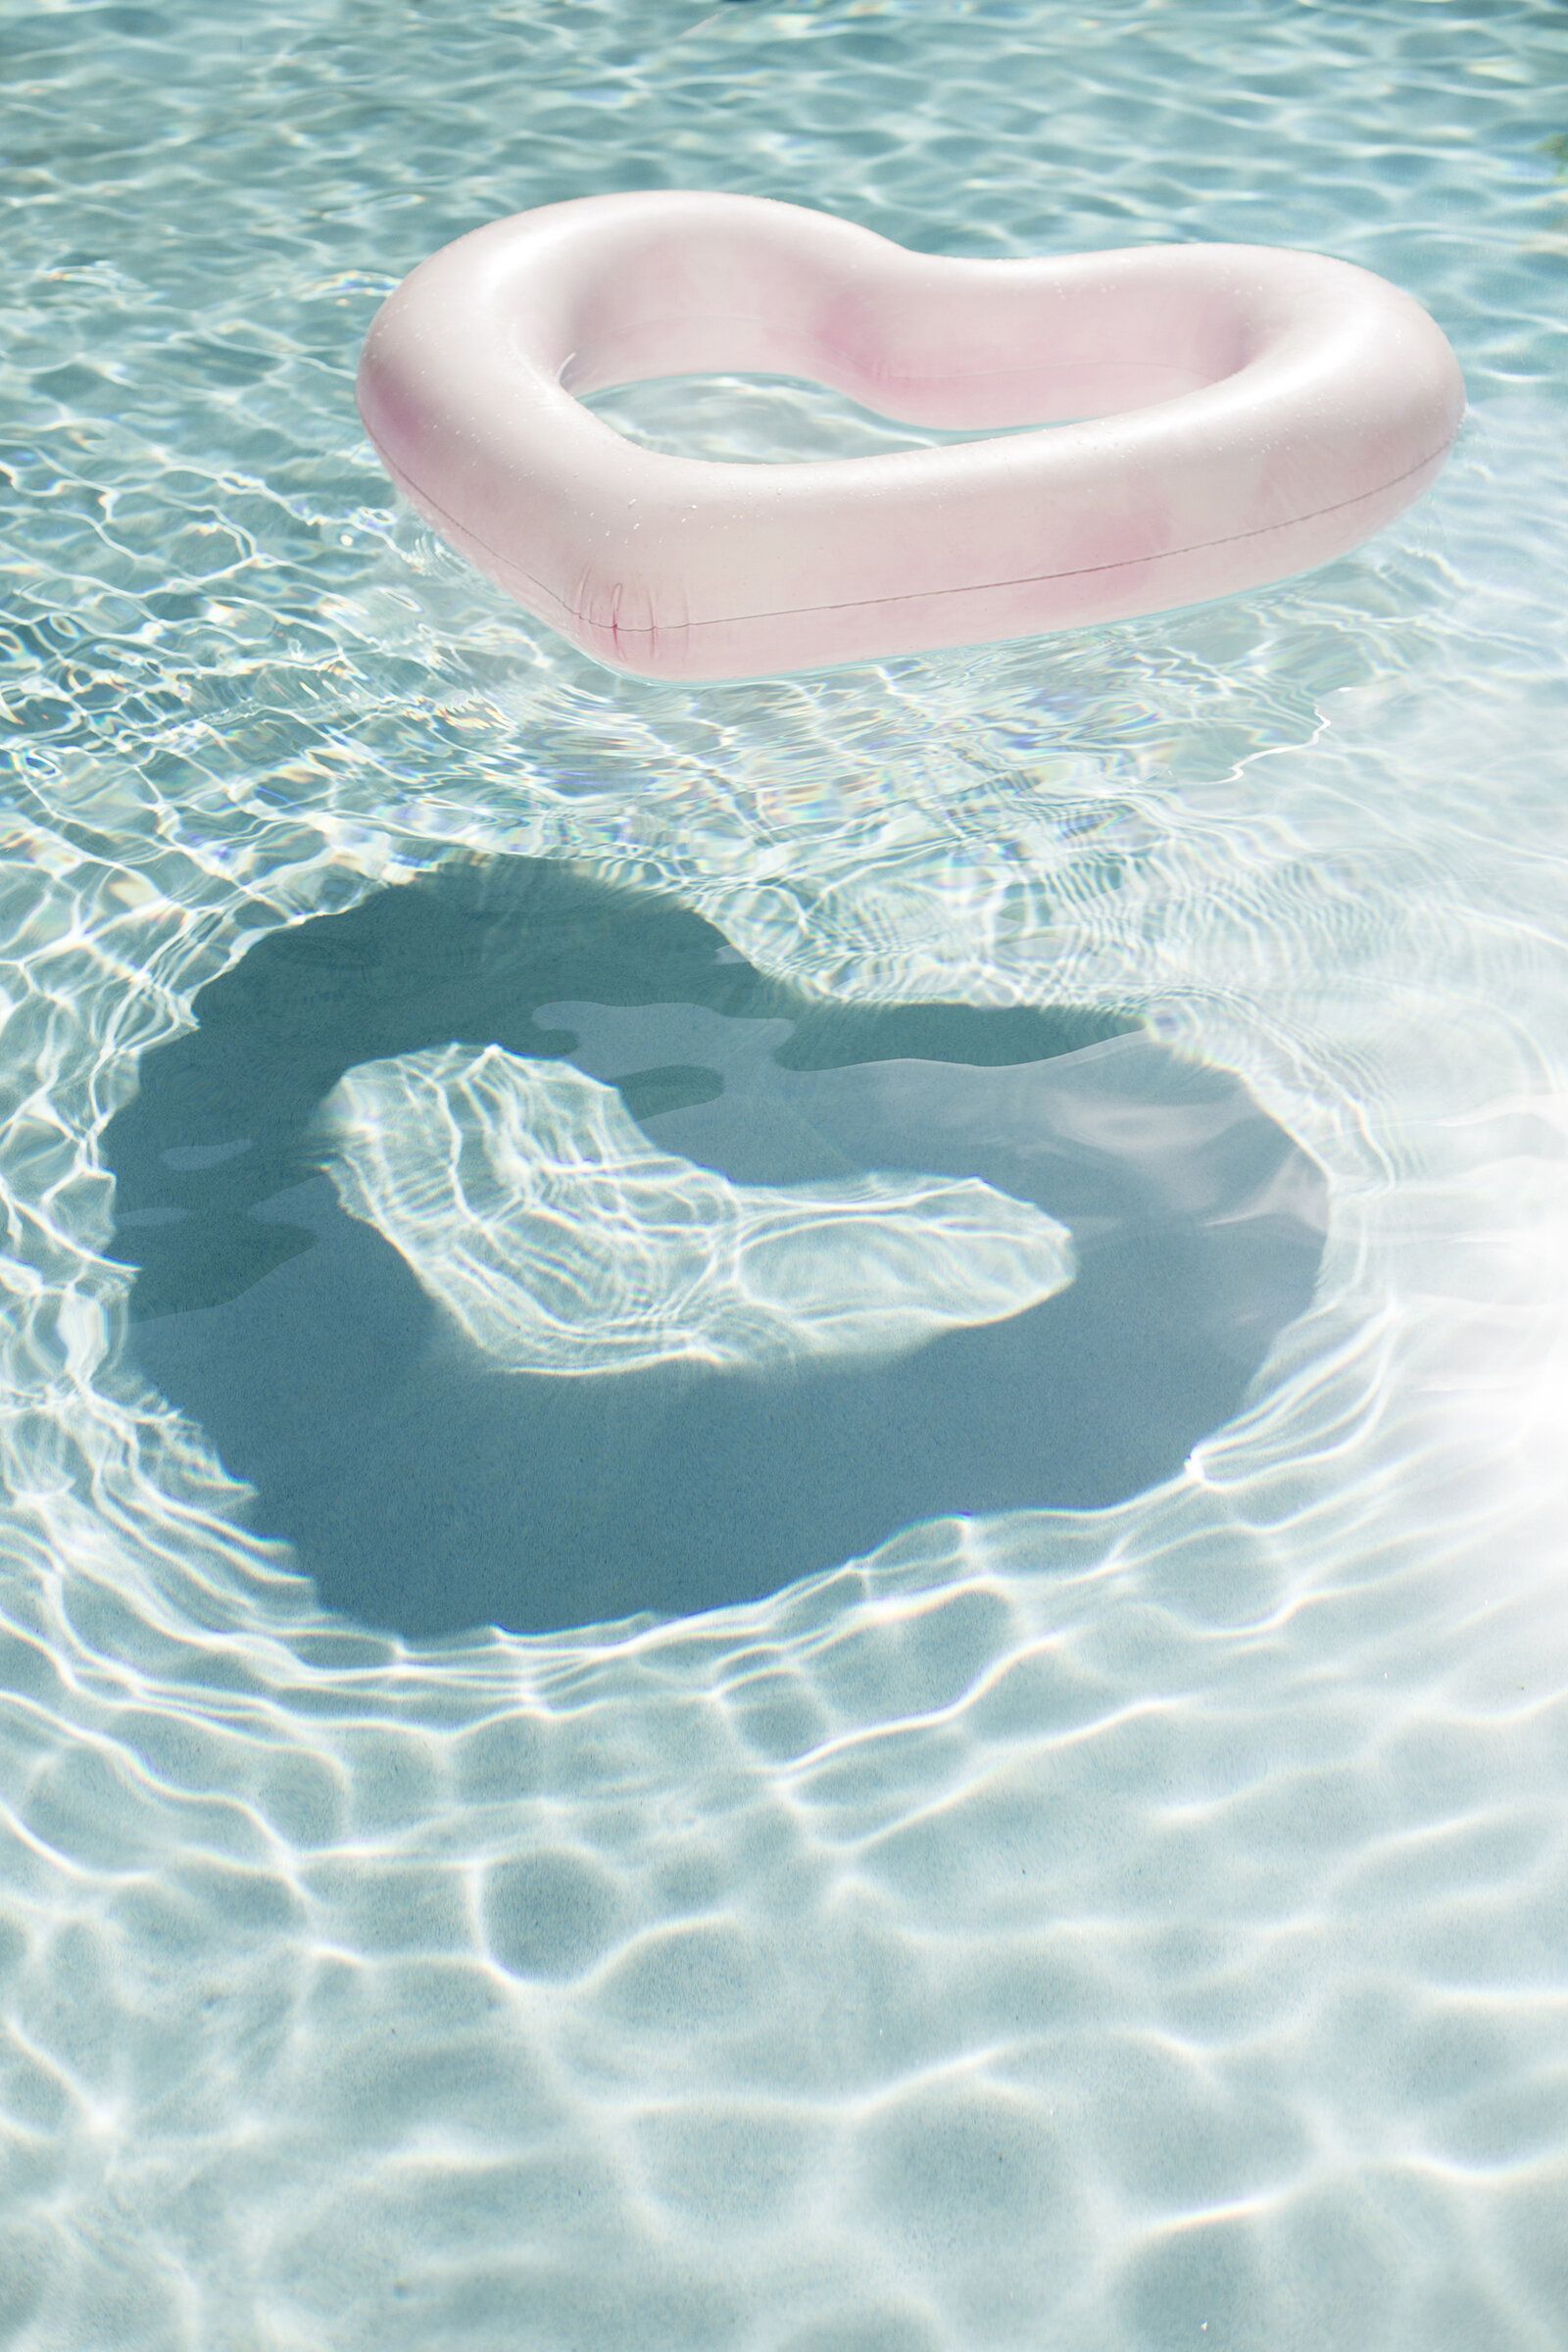 A heart shaped float in the water - Bright